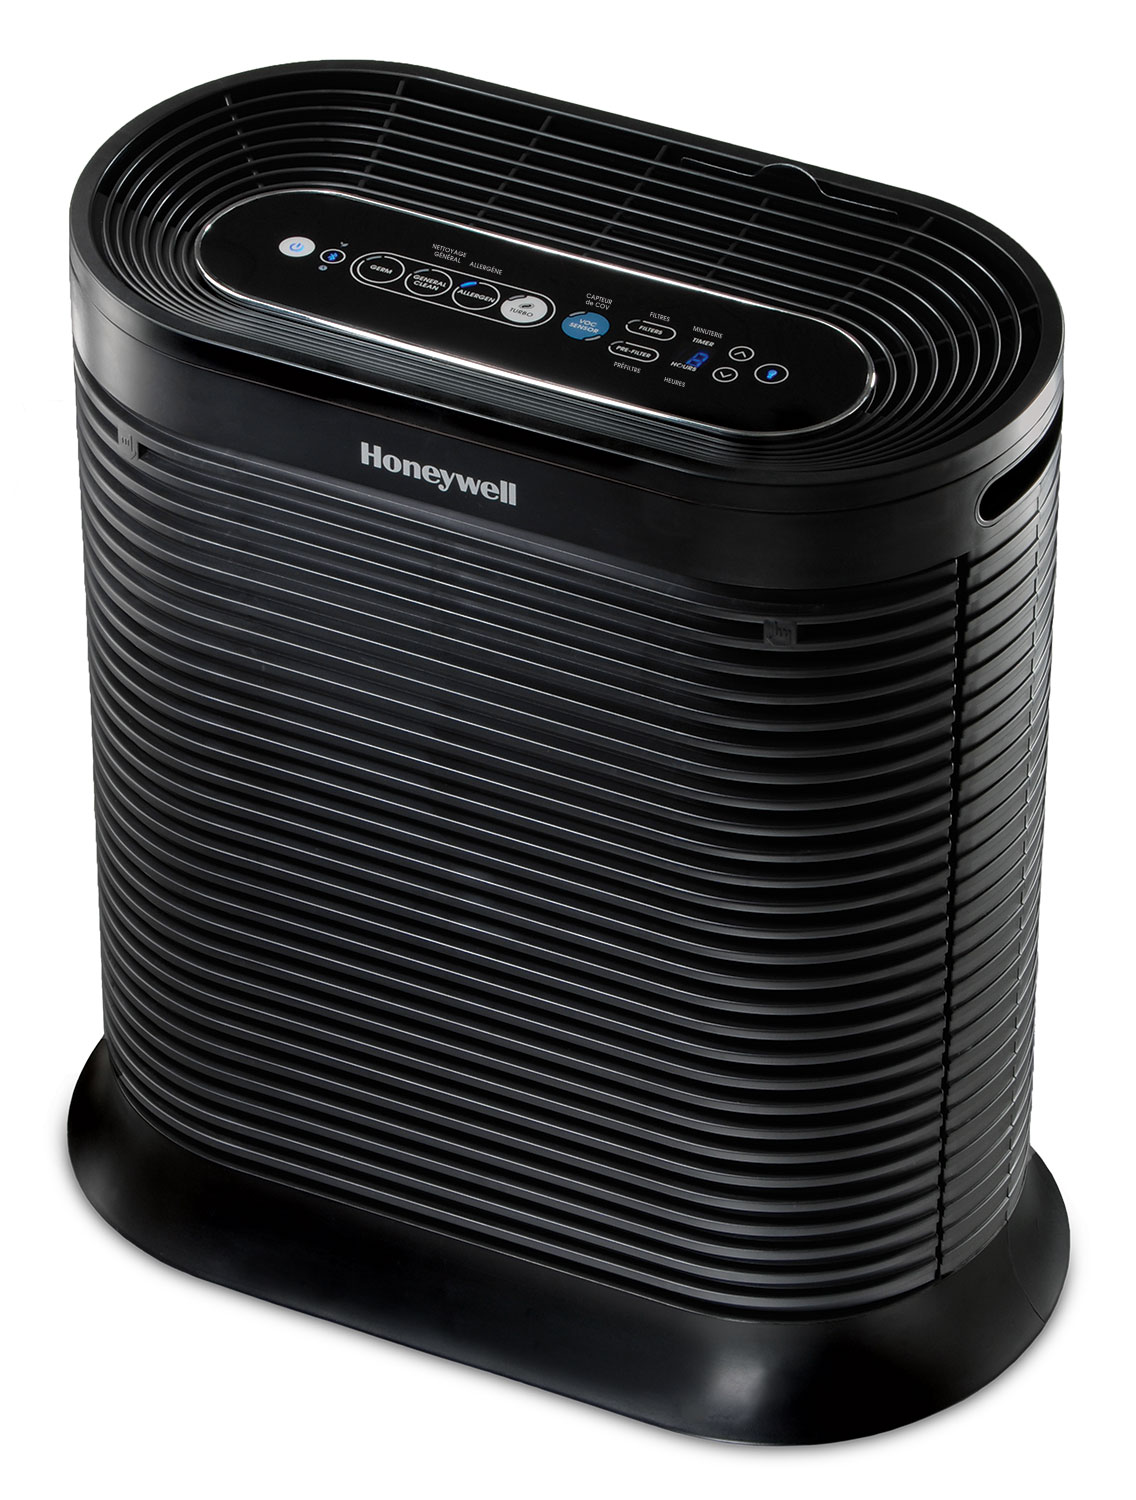 Honeywell Bluetooth HEPA Air Purifier for Large Rooms (310 sq ft), Black, HPA250B - image 1 of 6